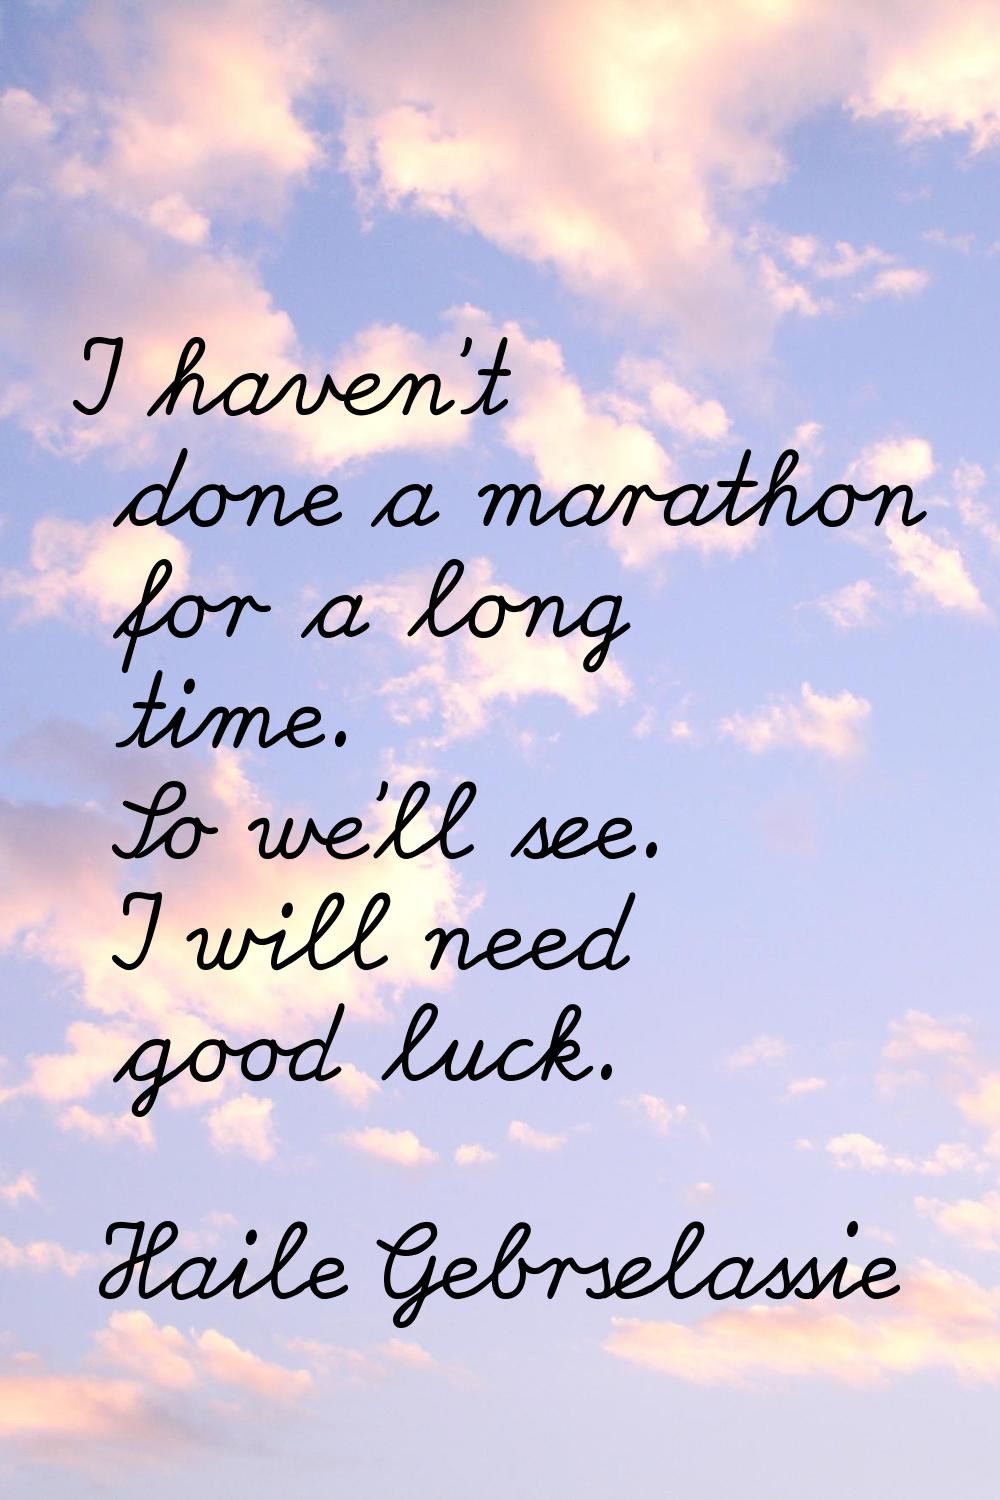 I haven't done a marathon for a long time. So we'll see. I will need good luck.